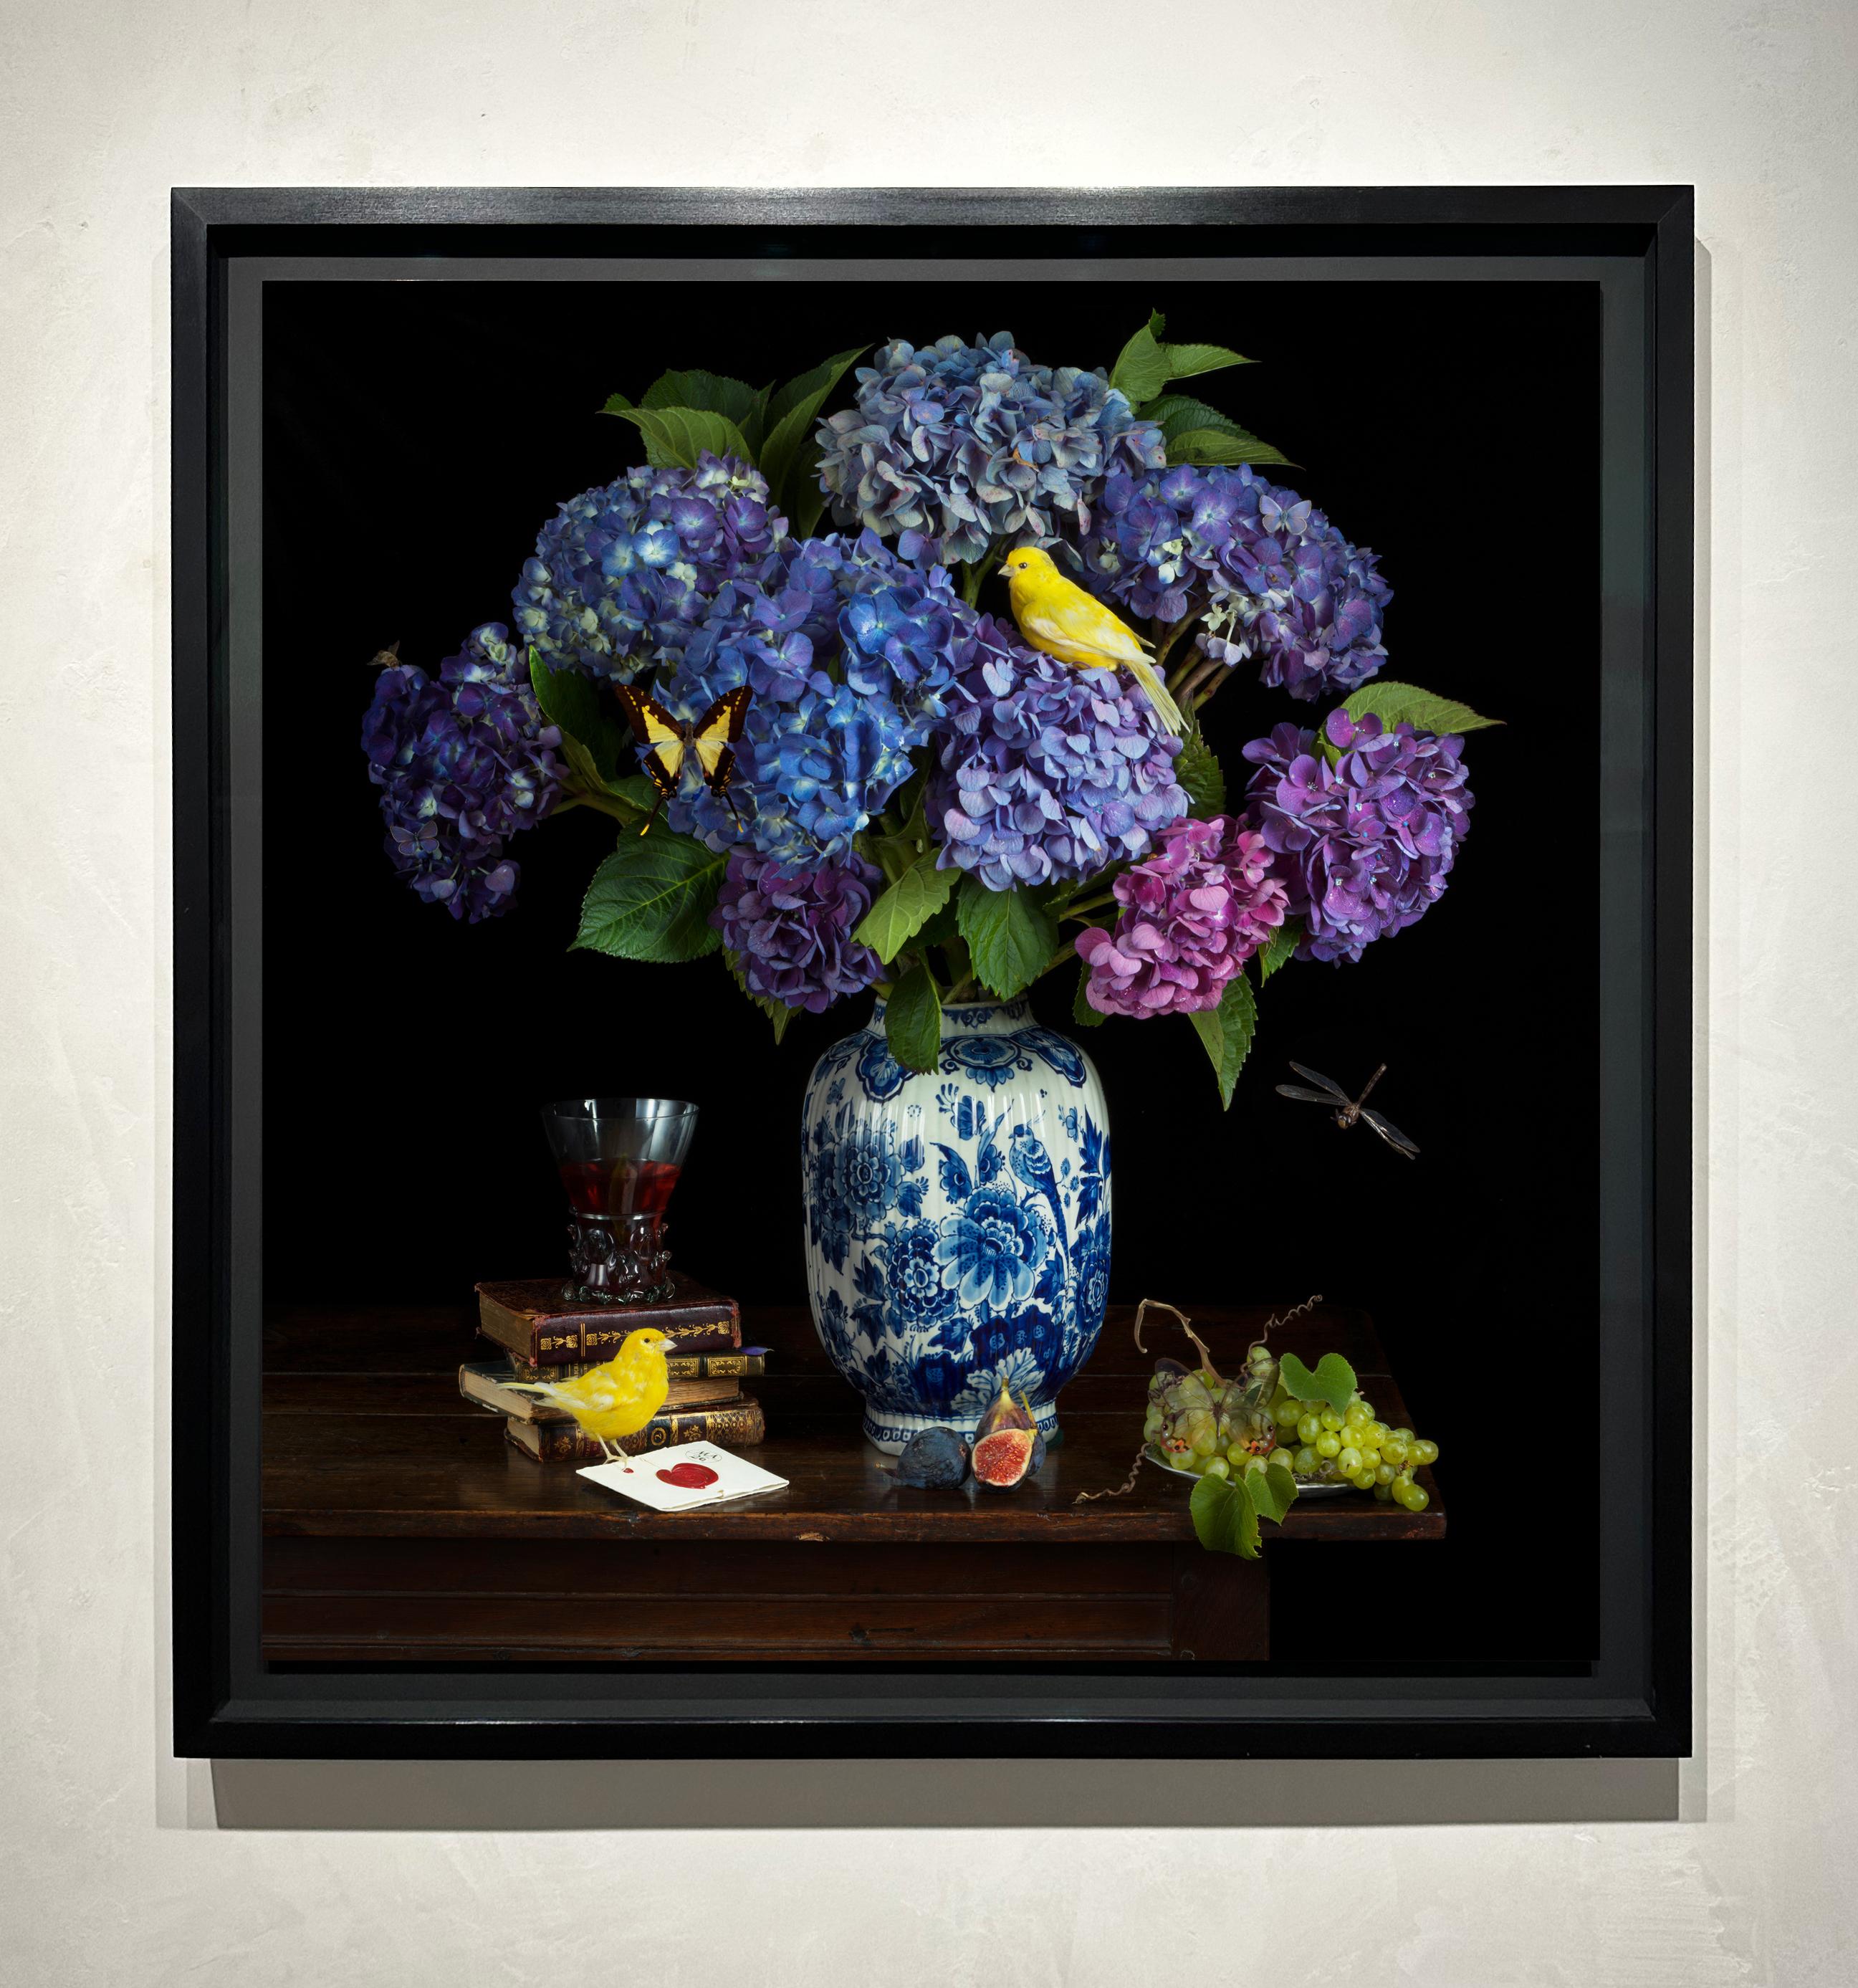 Blue Hydrangeas, Yellow Canaries & Love Letter - 36 x 36 inches, unframed - Photograph by Paulette Tavormina